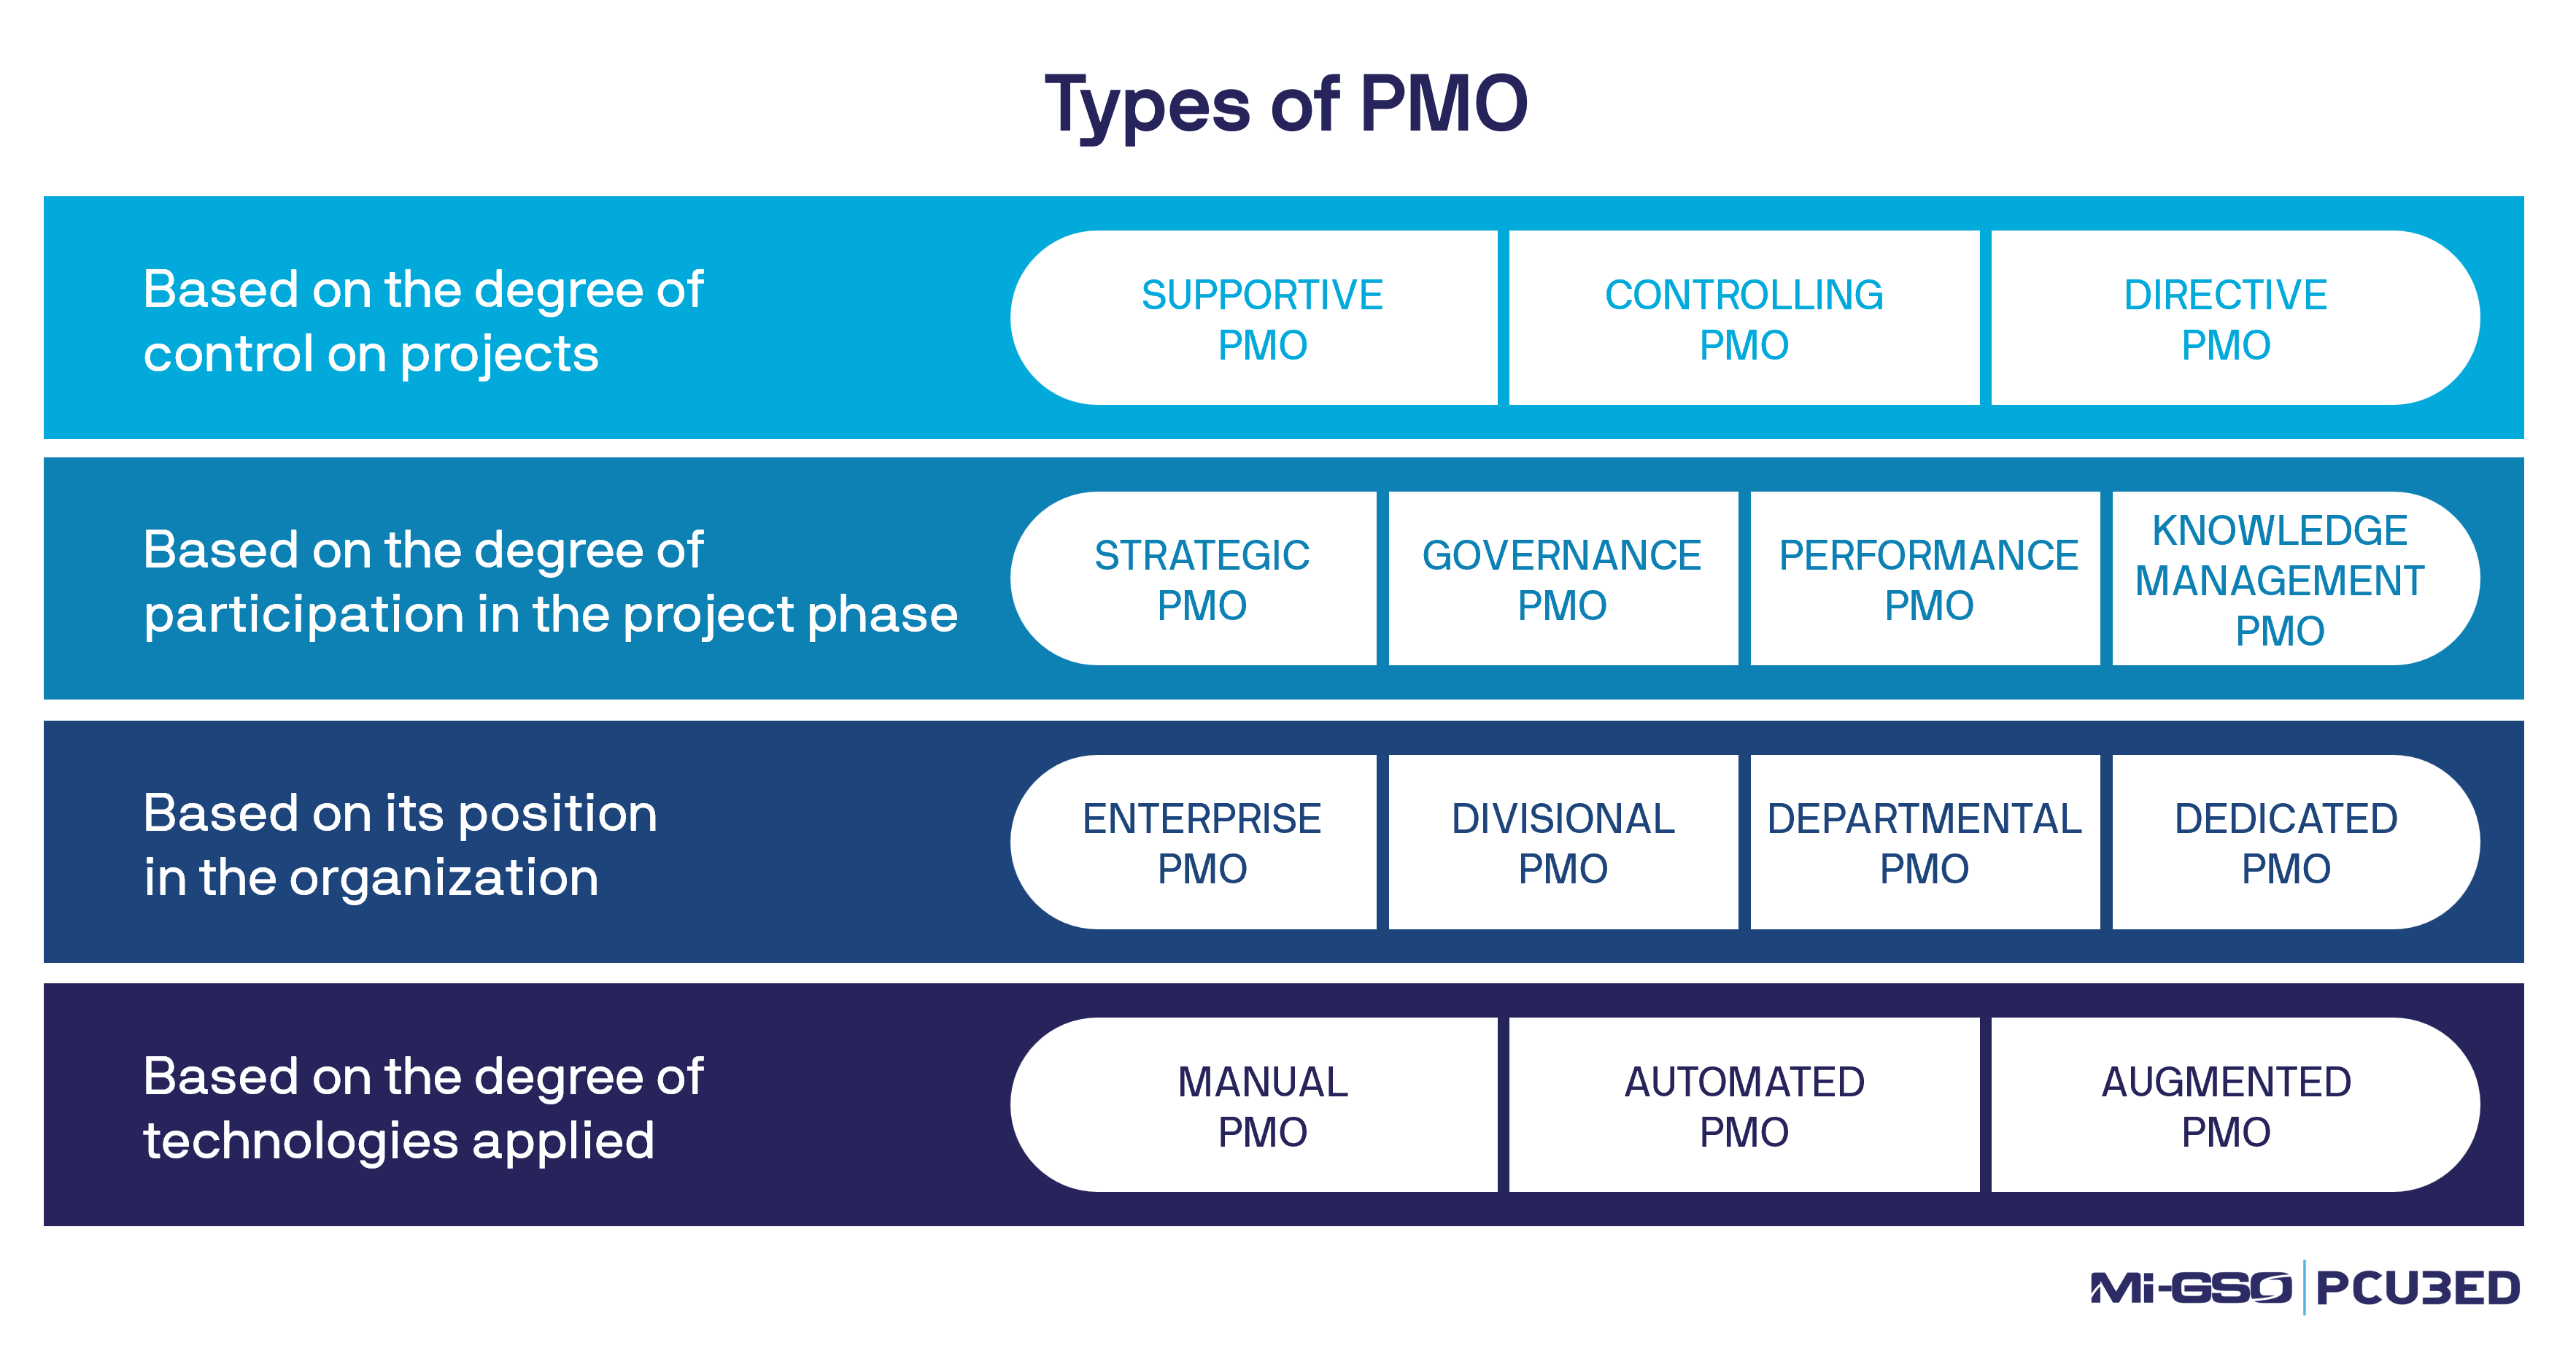 The different types of PMO